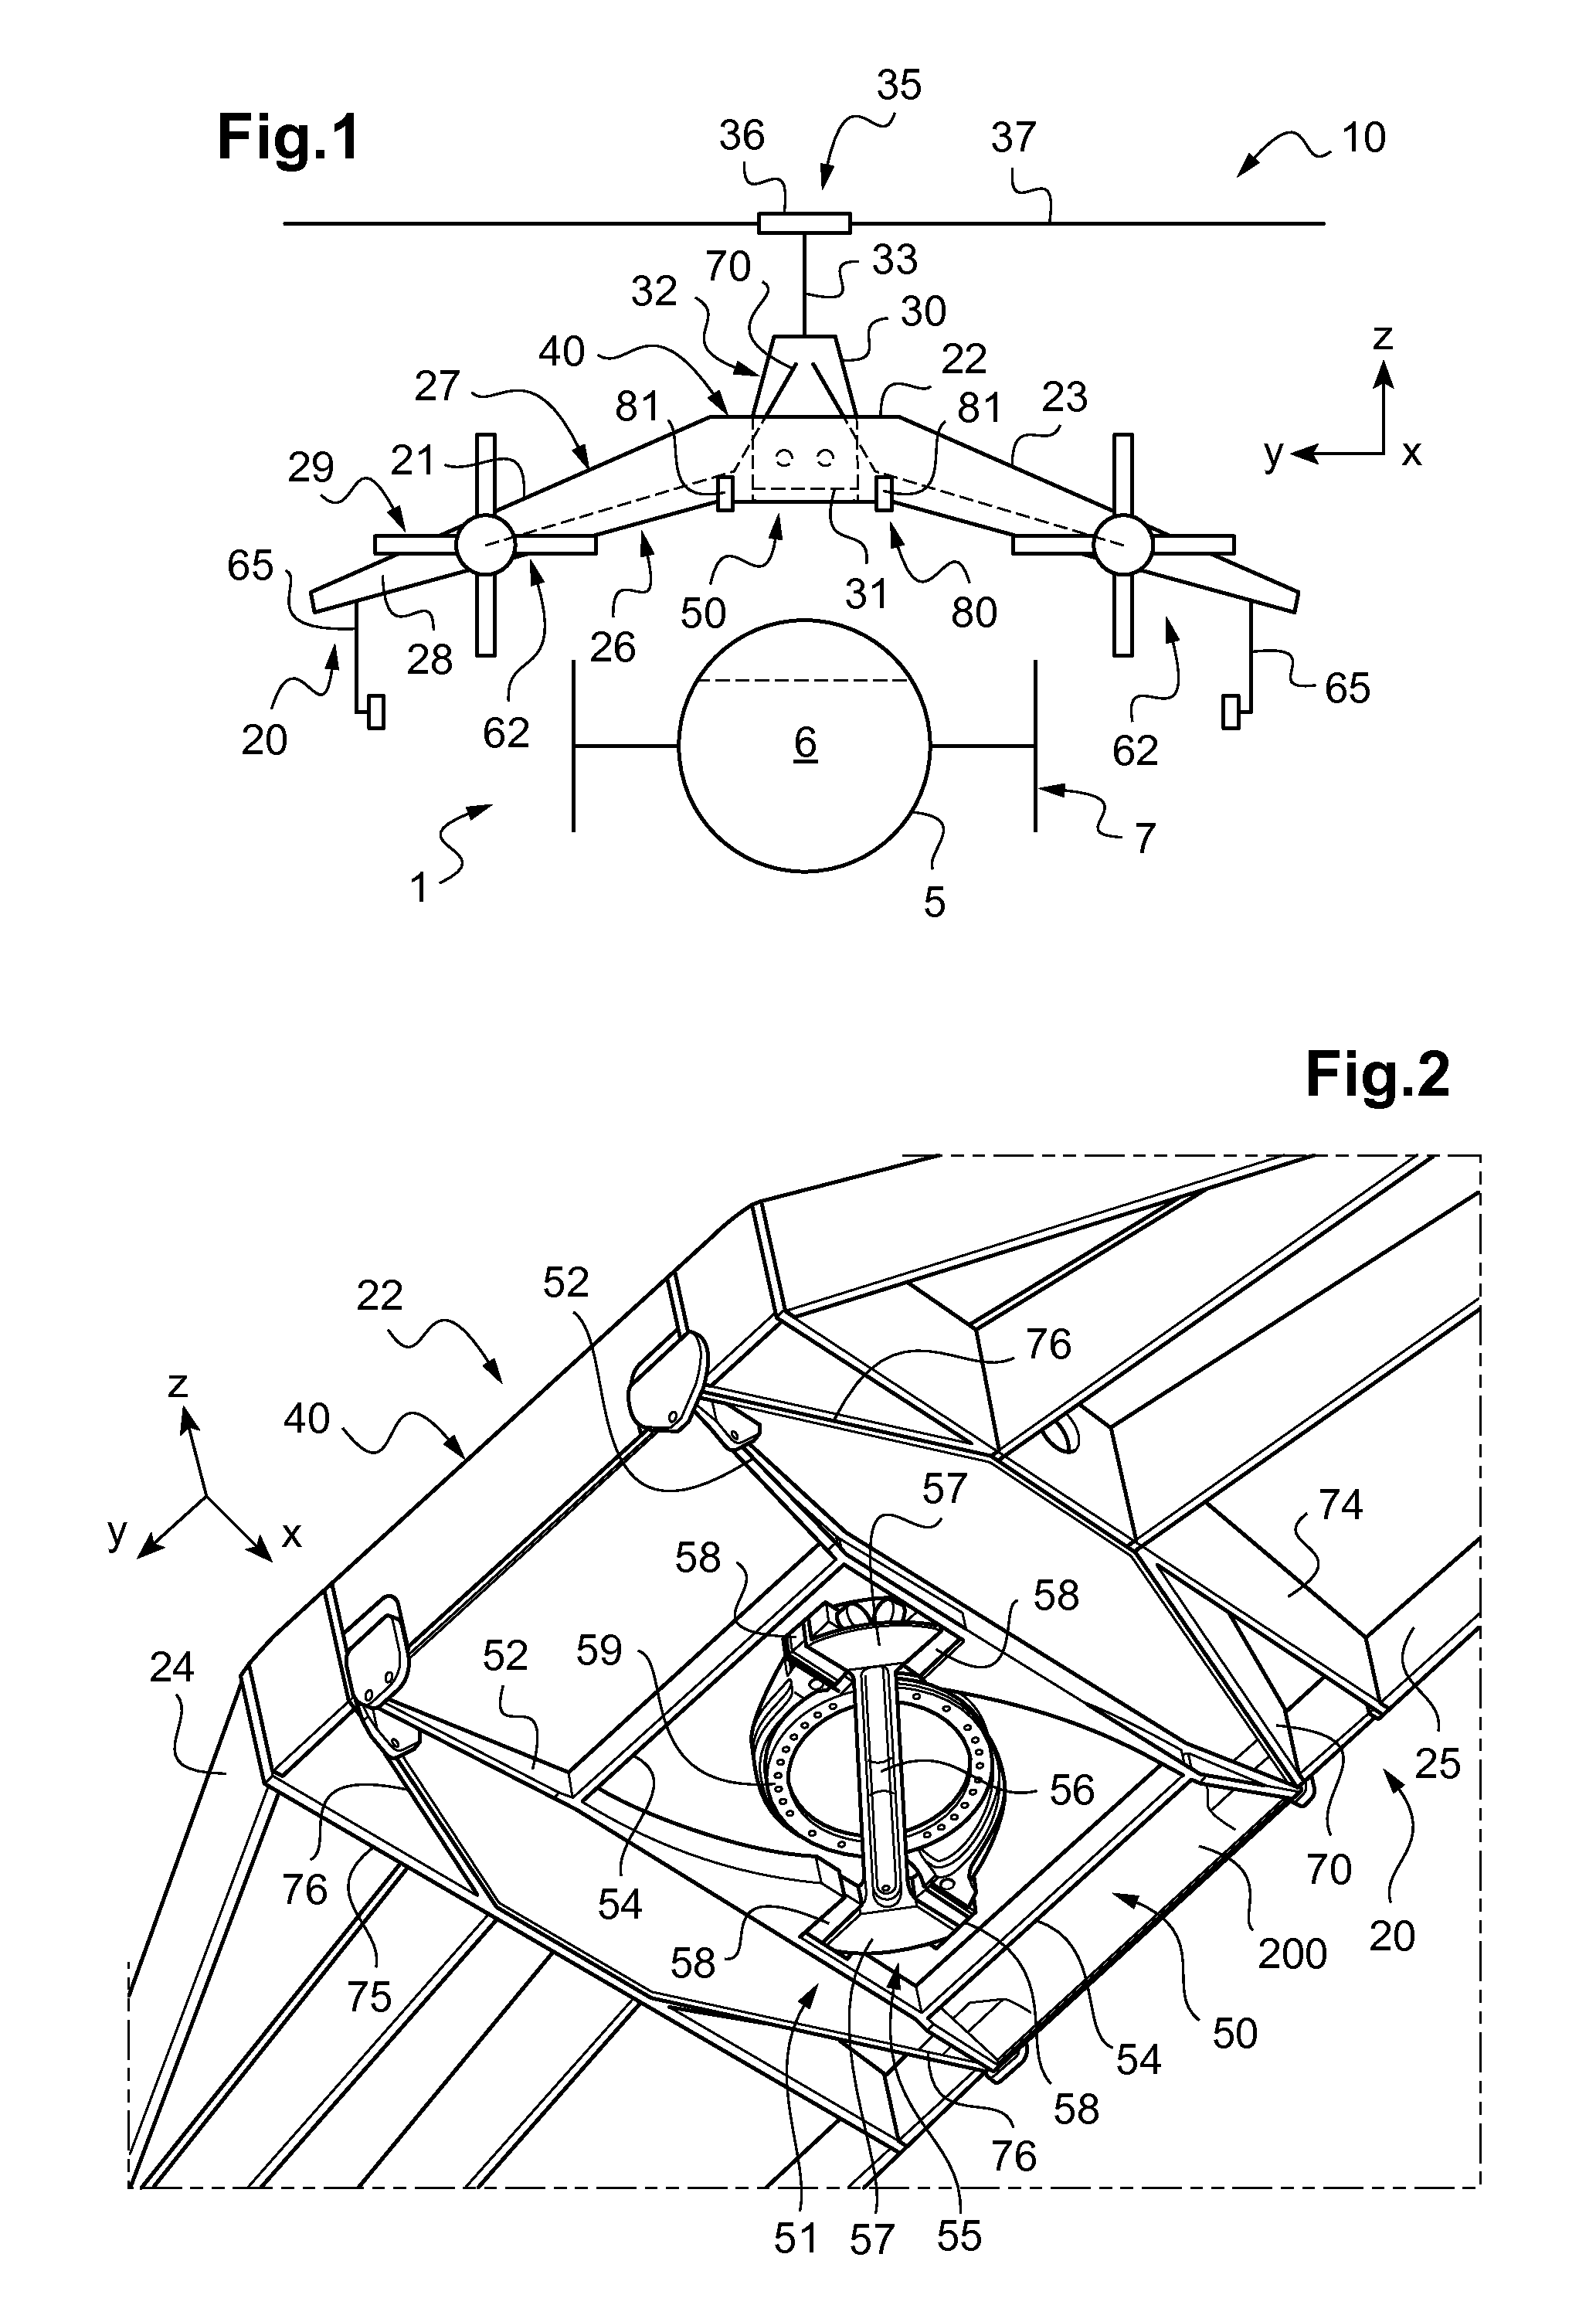 Removable lift assembly for a rotorcraft, and a rotorcraft